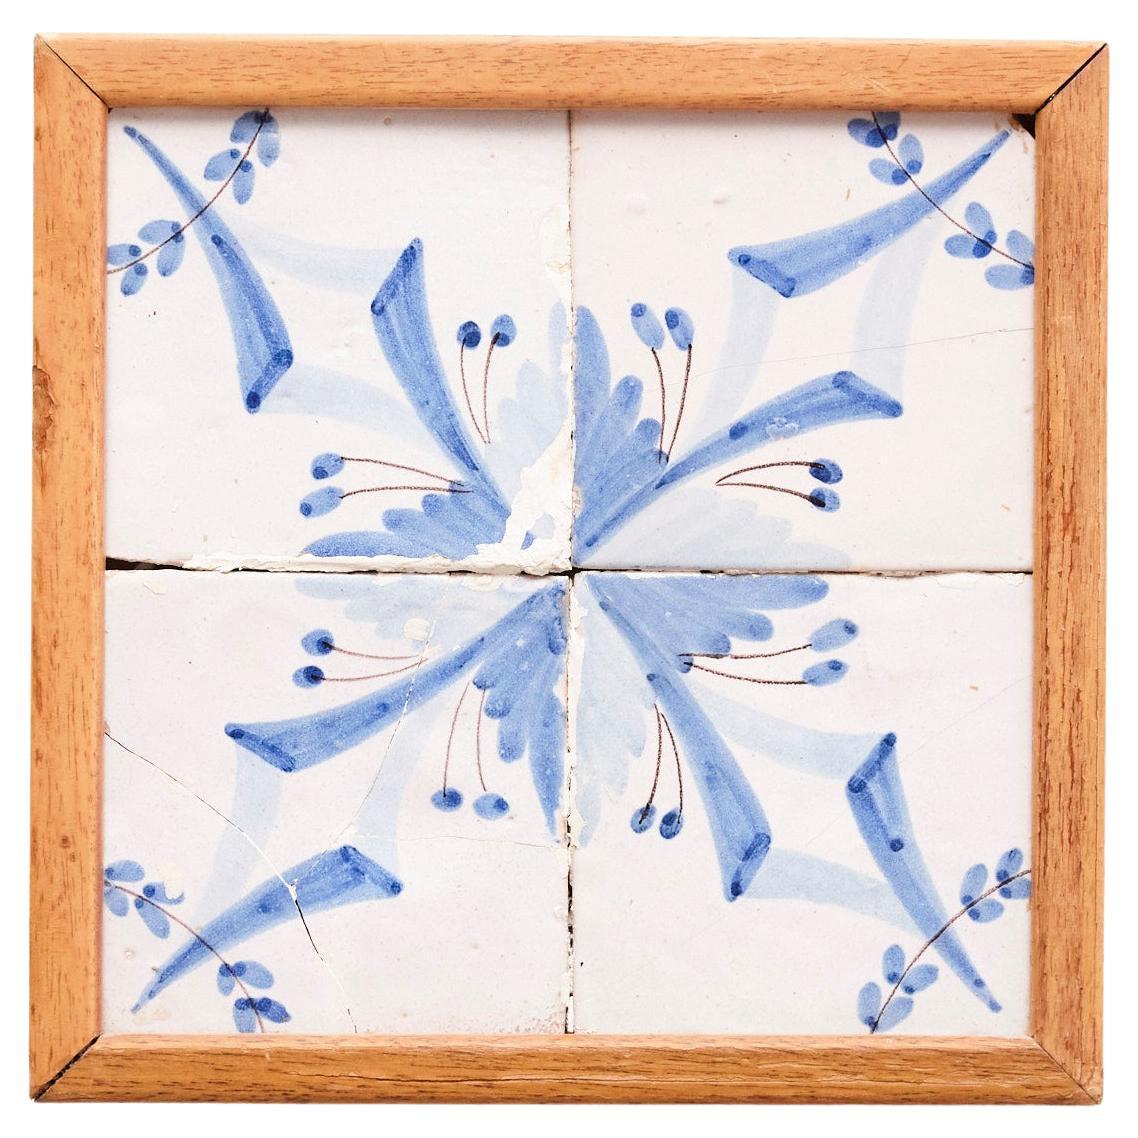 Framed Ceramic Tile Hand Painted Composition, circa 1950